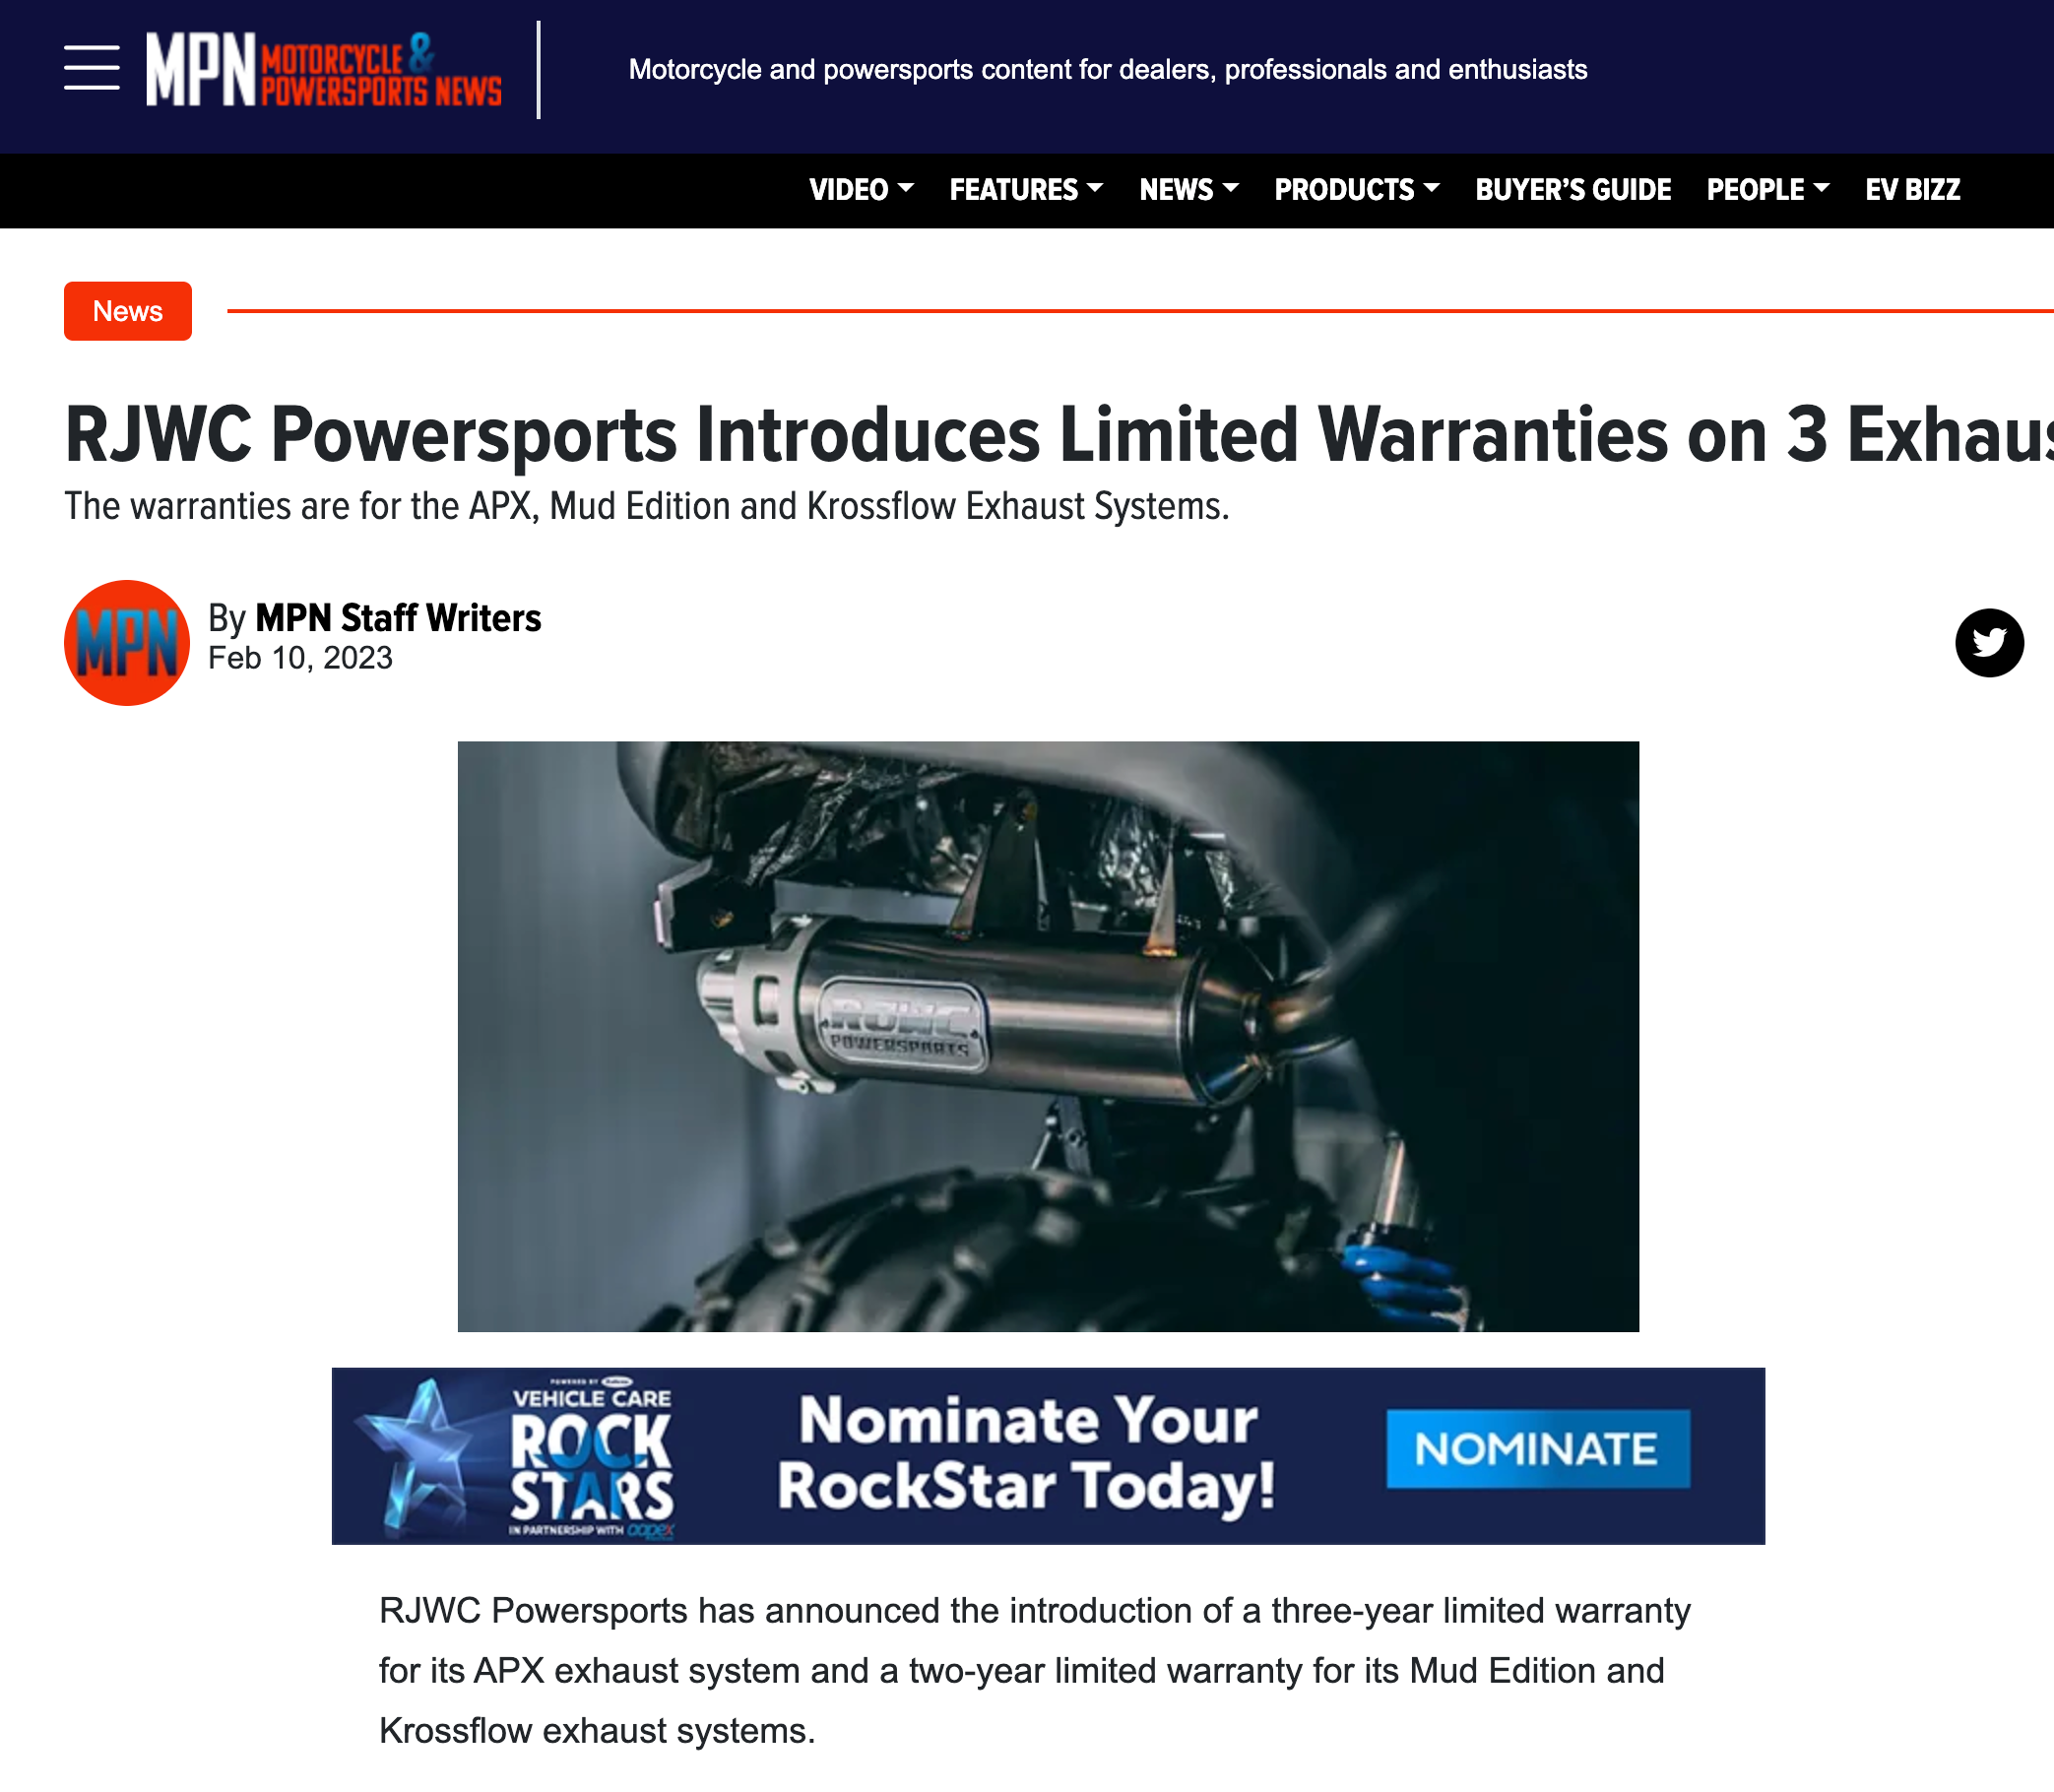 At RJWC Powersports, We are Dedicated to Providing the Best Aftermarket Powersports Parts